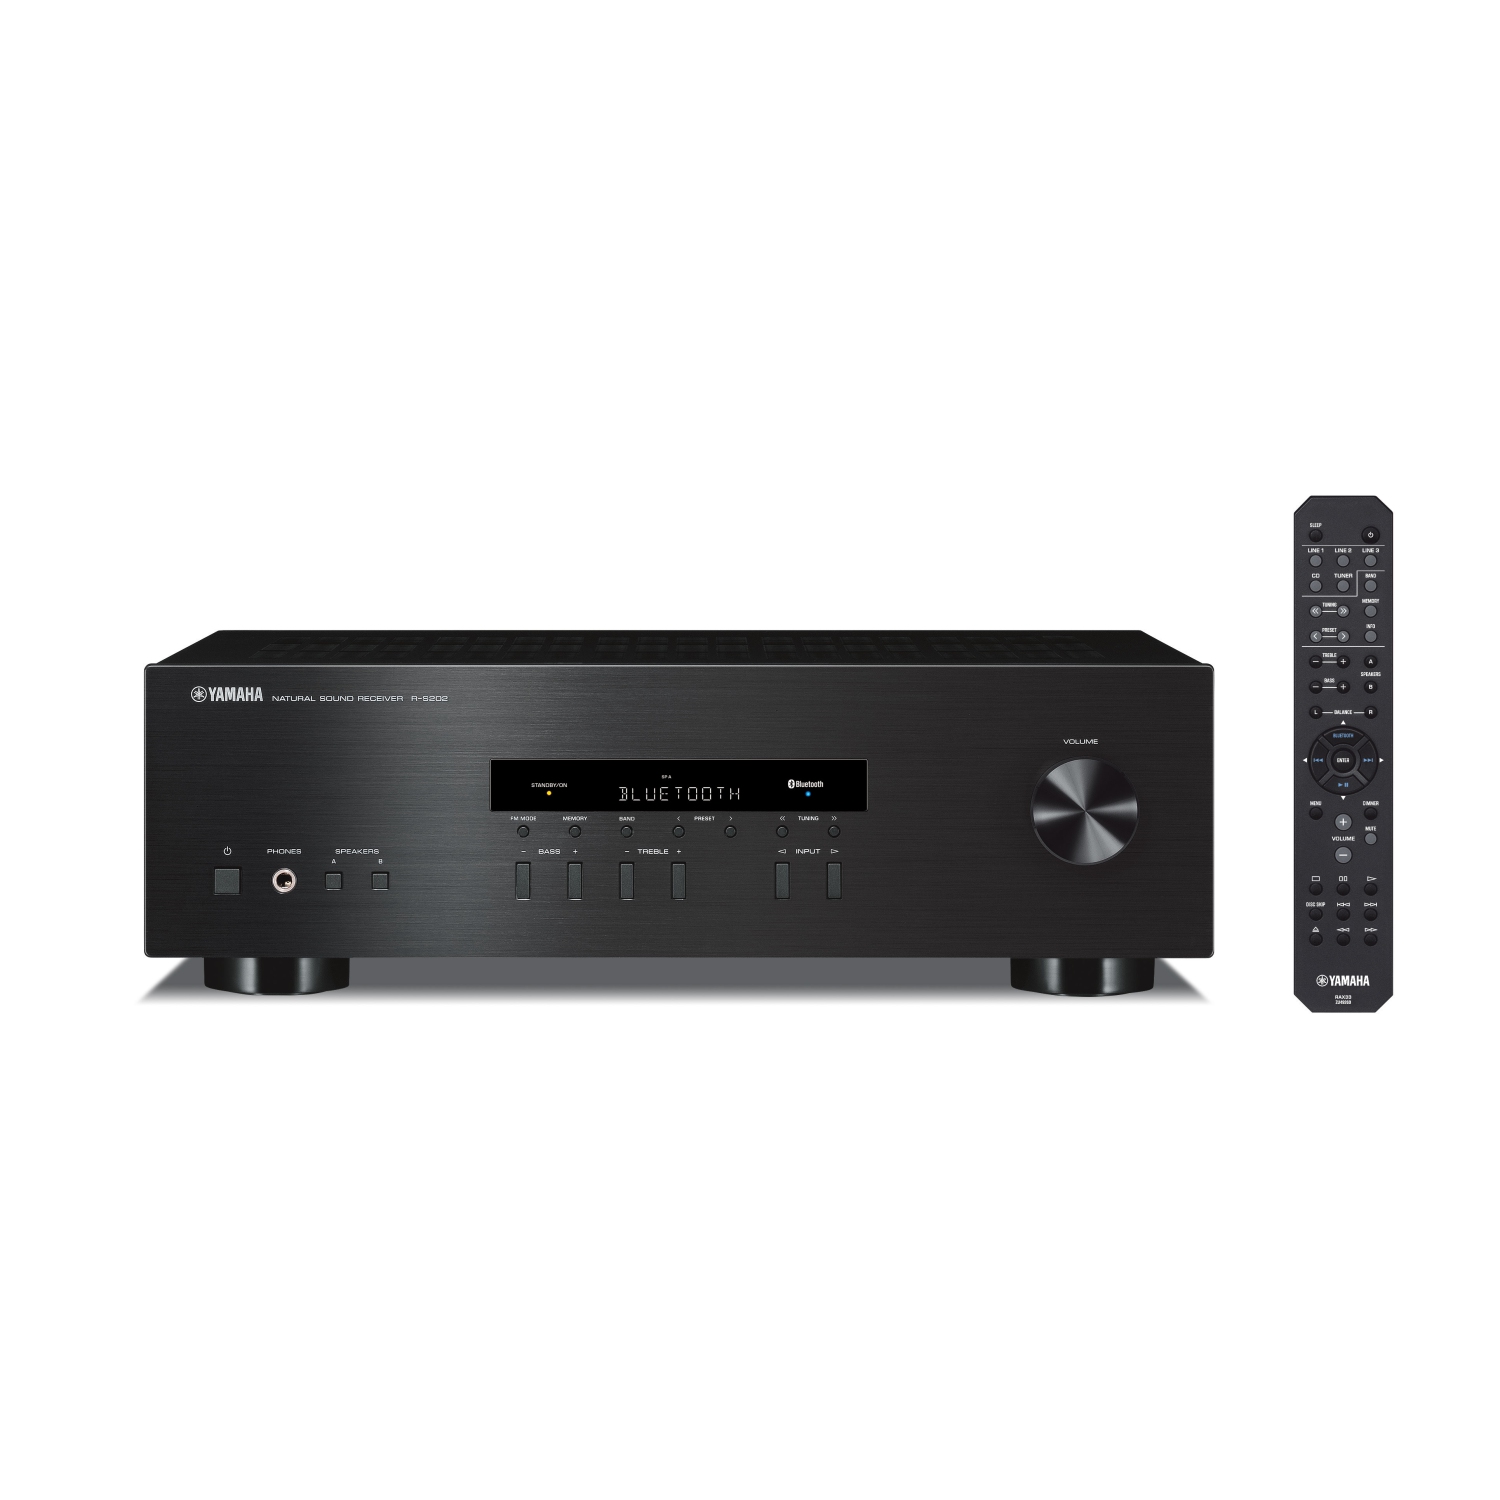 Yamaha R-S202 Stereo Receiver with Bluetooth (Black)